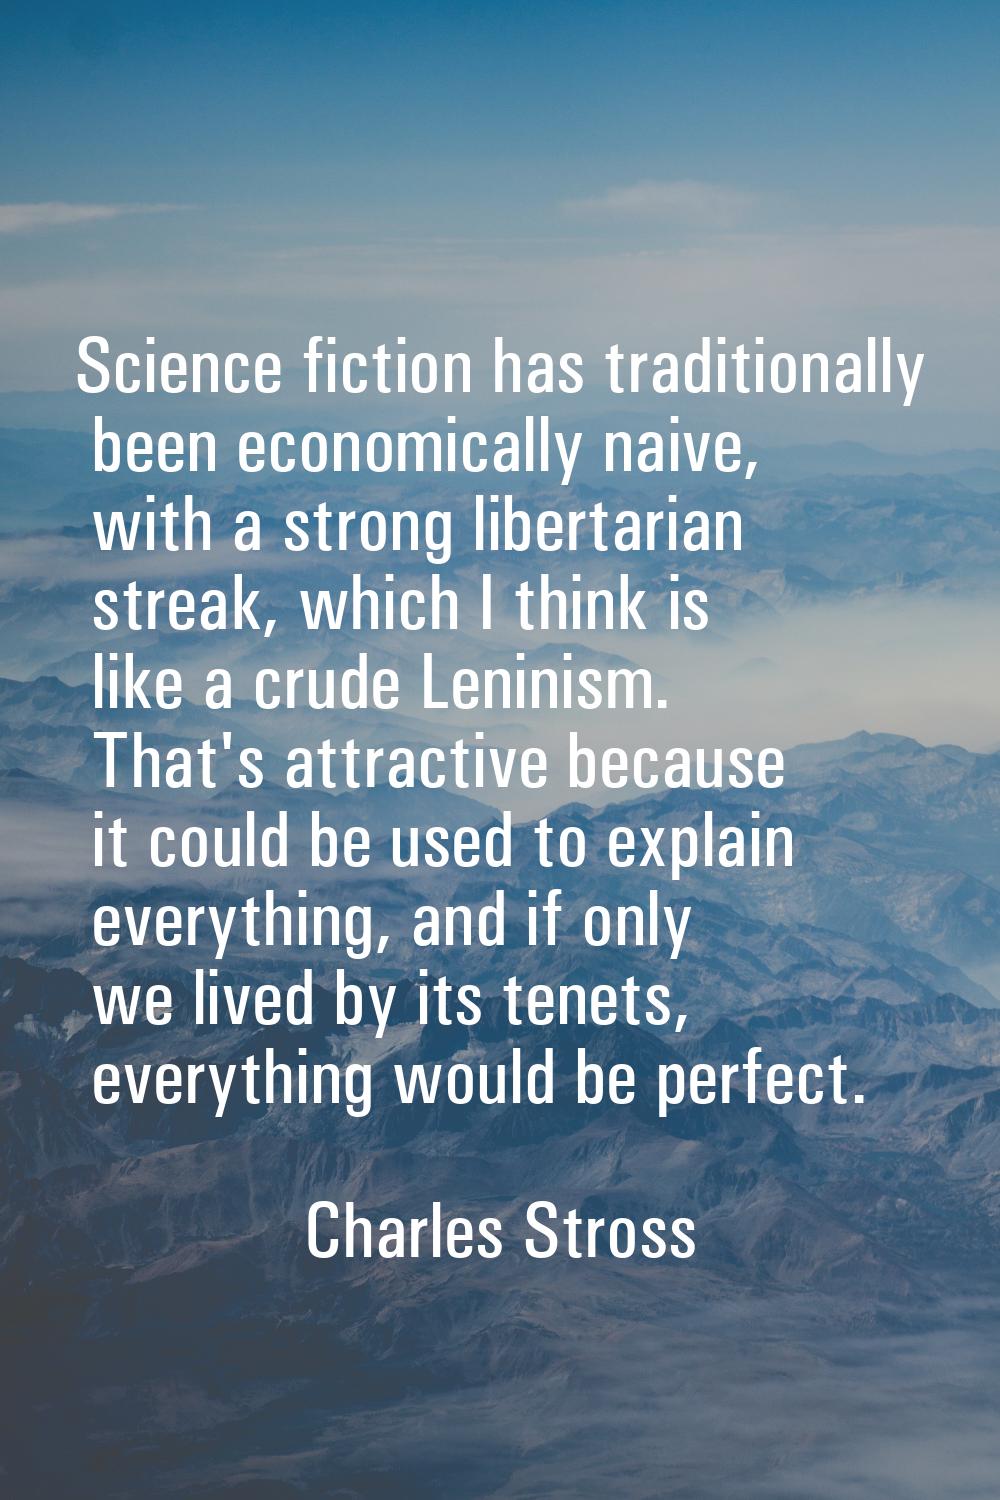 Science fiction has traditionally been economically naive, with a strong libertarian streak, which 